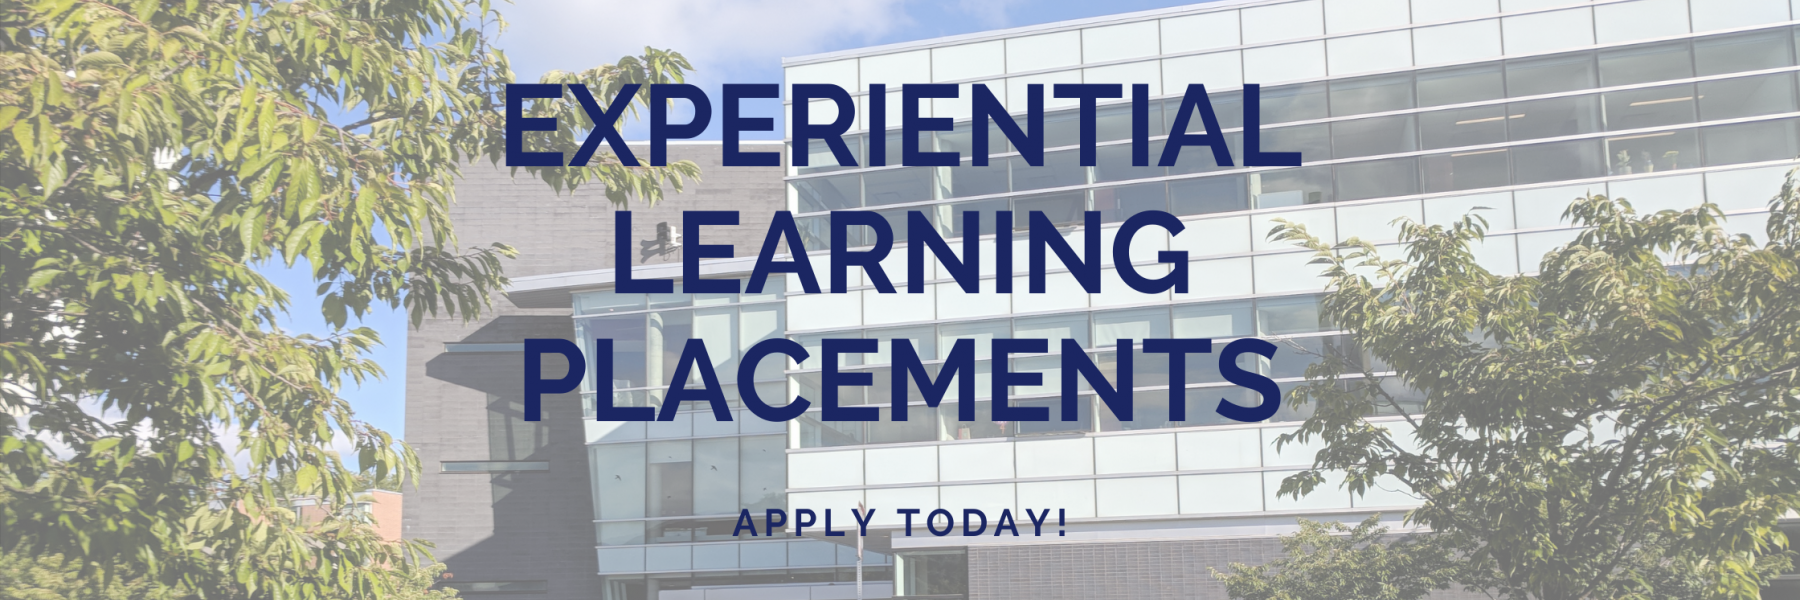 Experiential Learning Placements, apply now!